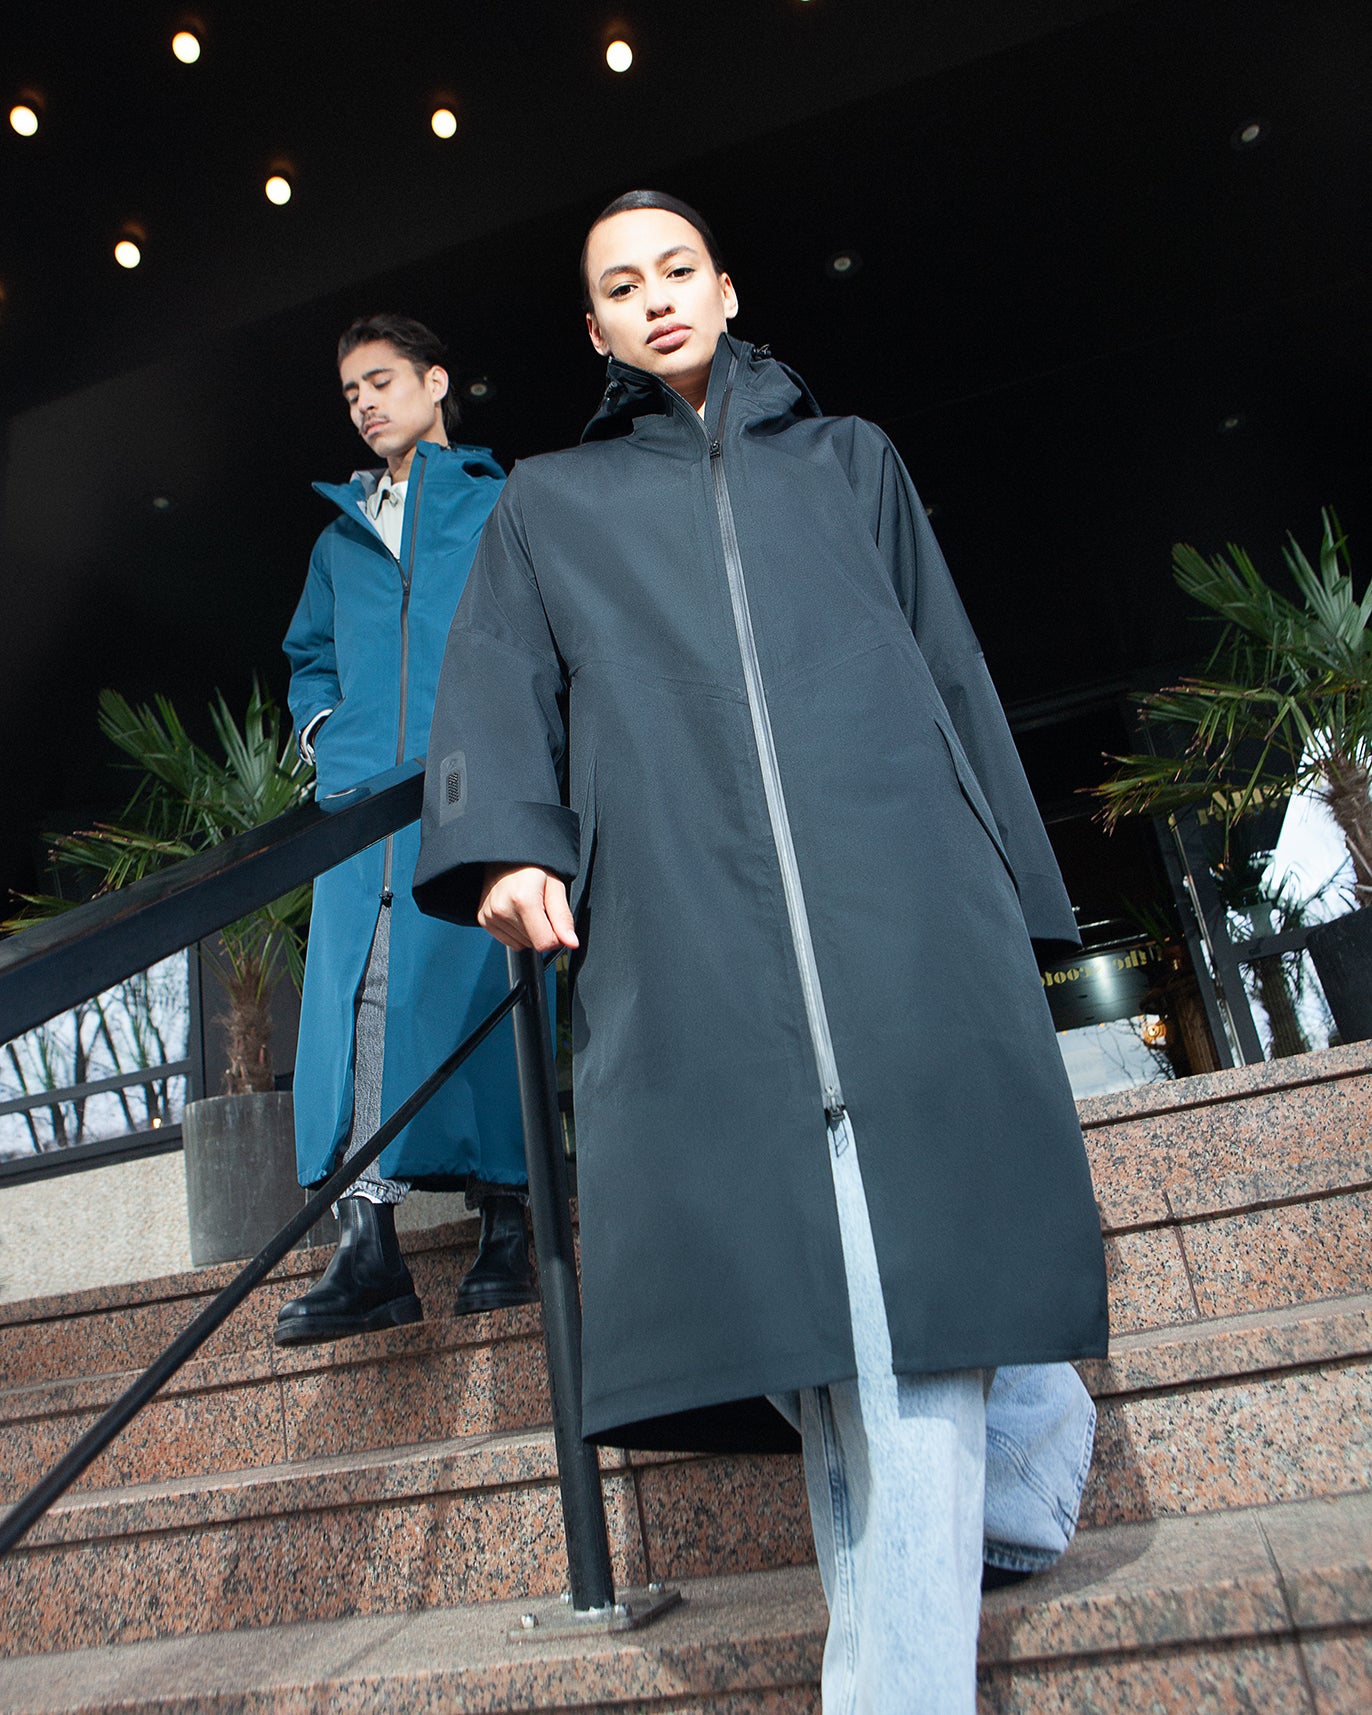 rent a raincoat at hotel v in Amsterdam, two models wearing the rainwear walking out of the hotel